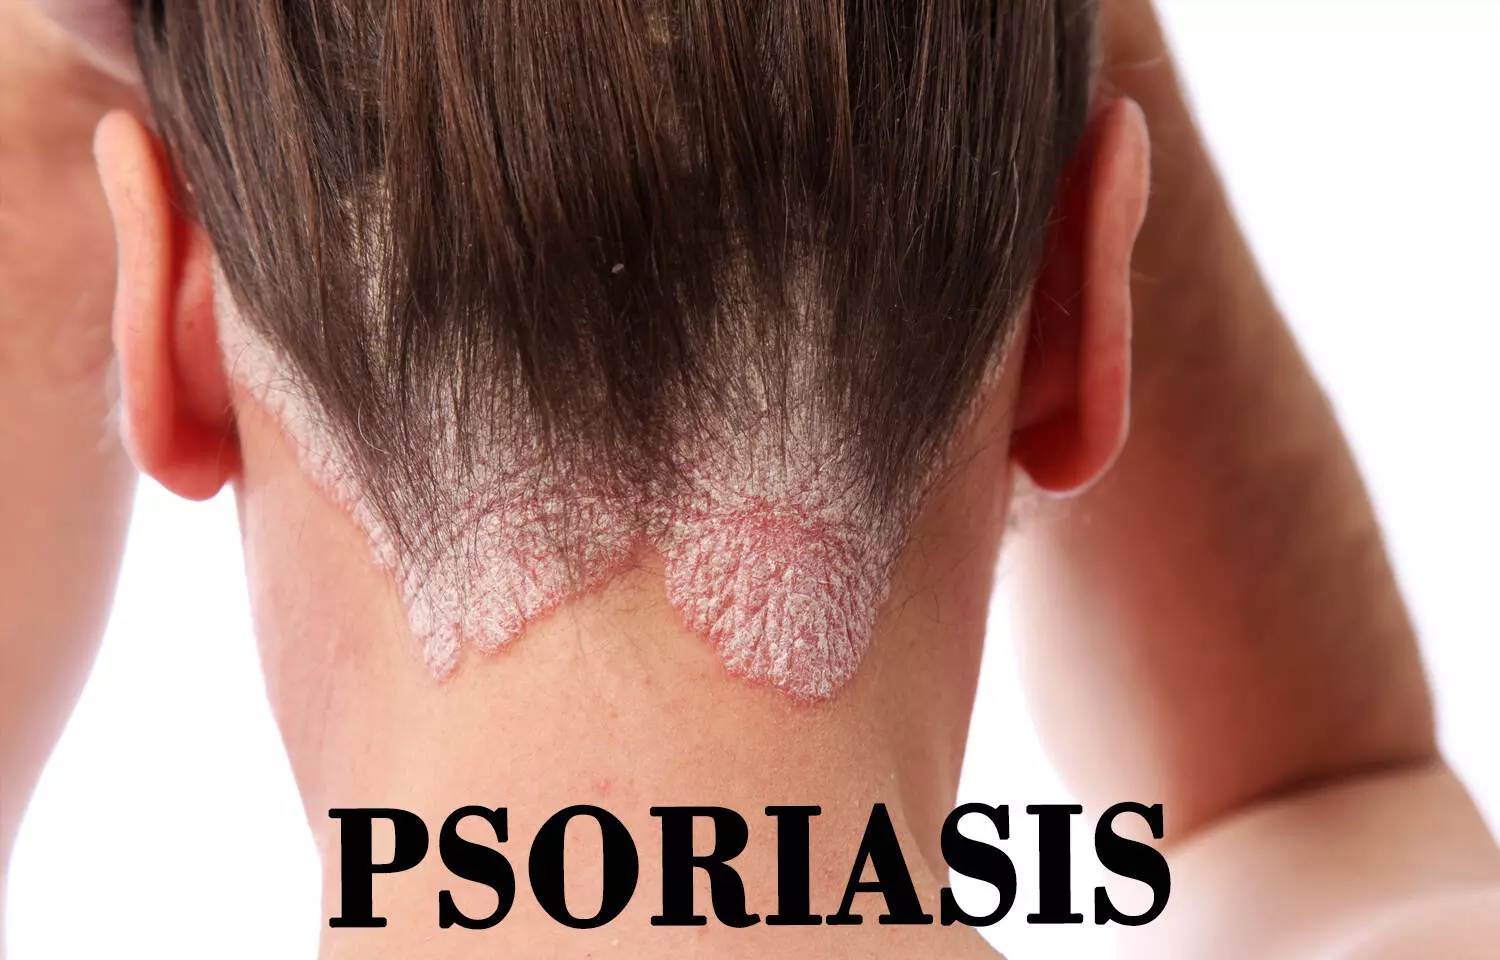 Glycerin may help calm classic scaly, red, raised and itchy patches in psoriasis